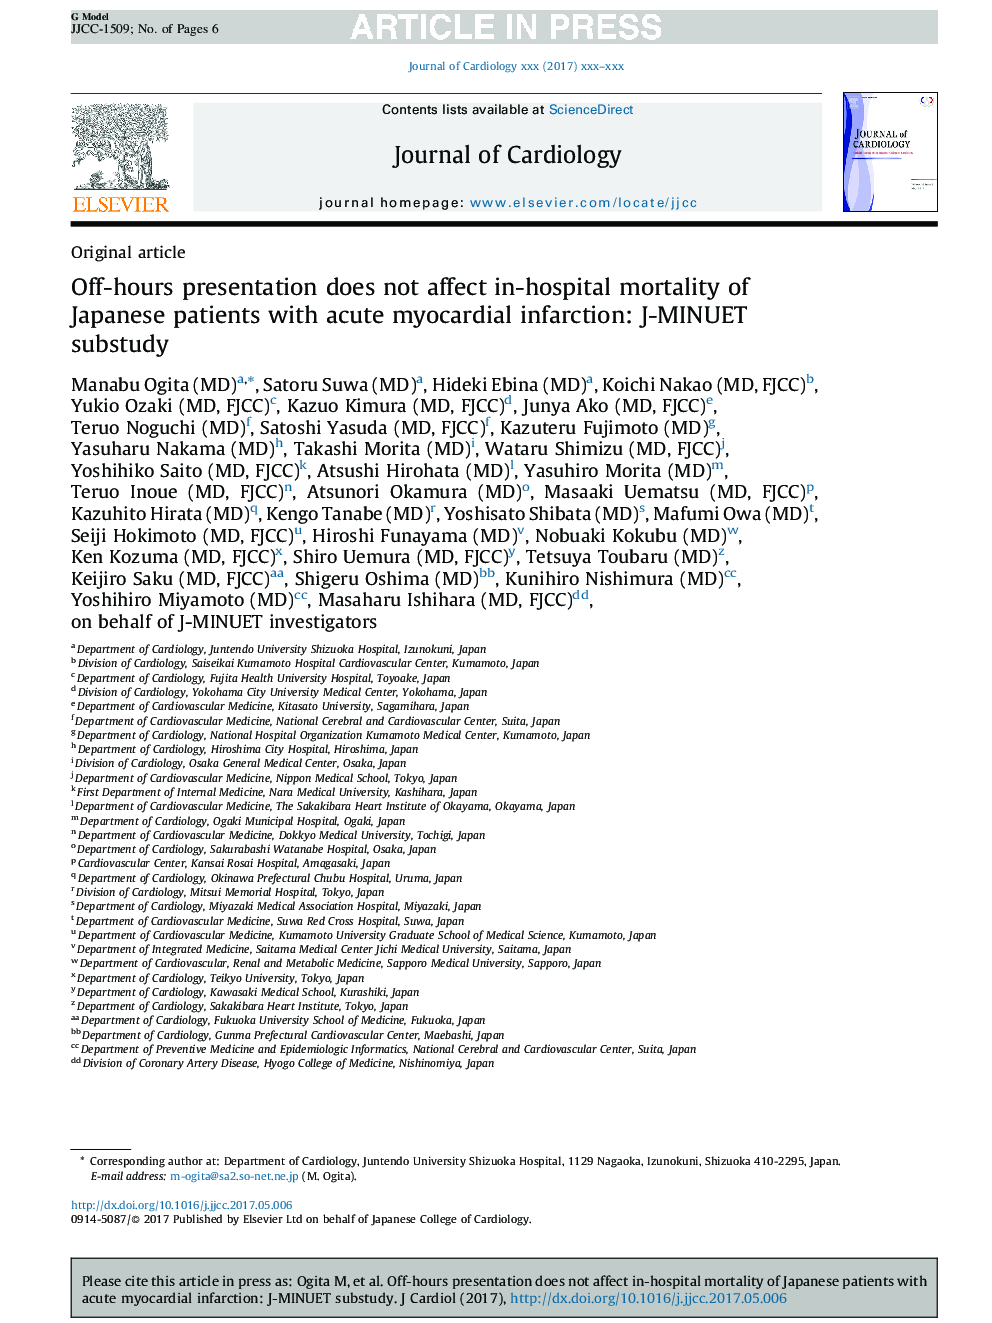 Off-hours presentation does not affect in-hospital mortality of Japanese patients with acute myocardial infarction: J-MINUET substudy